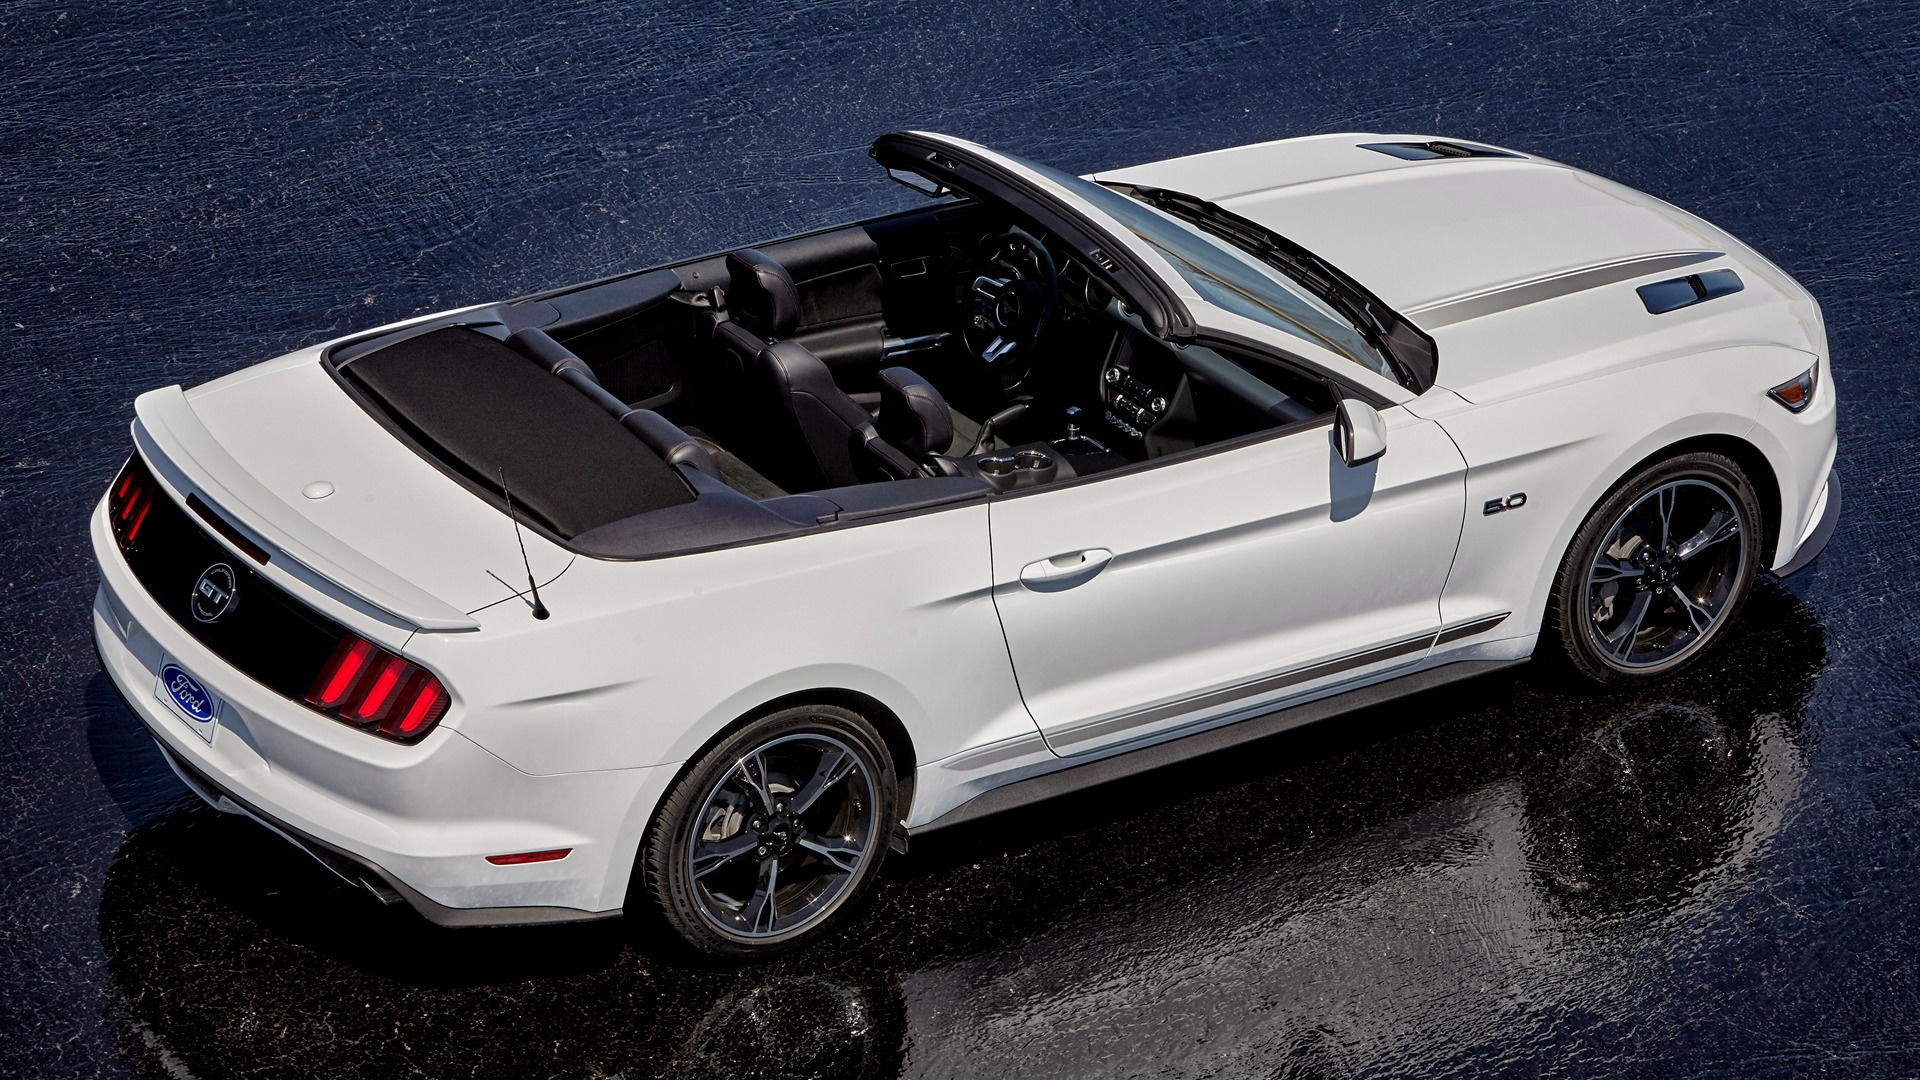 Car Convertible Ford Mustang Gt Convertible California Special Muscle Car White Car 1920x1080